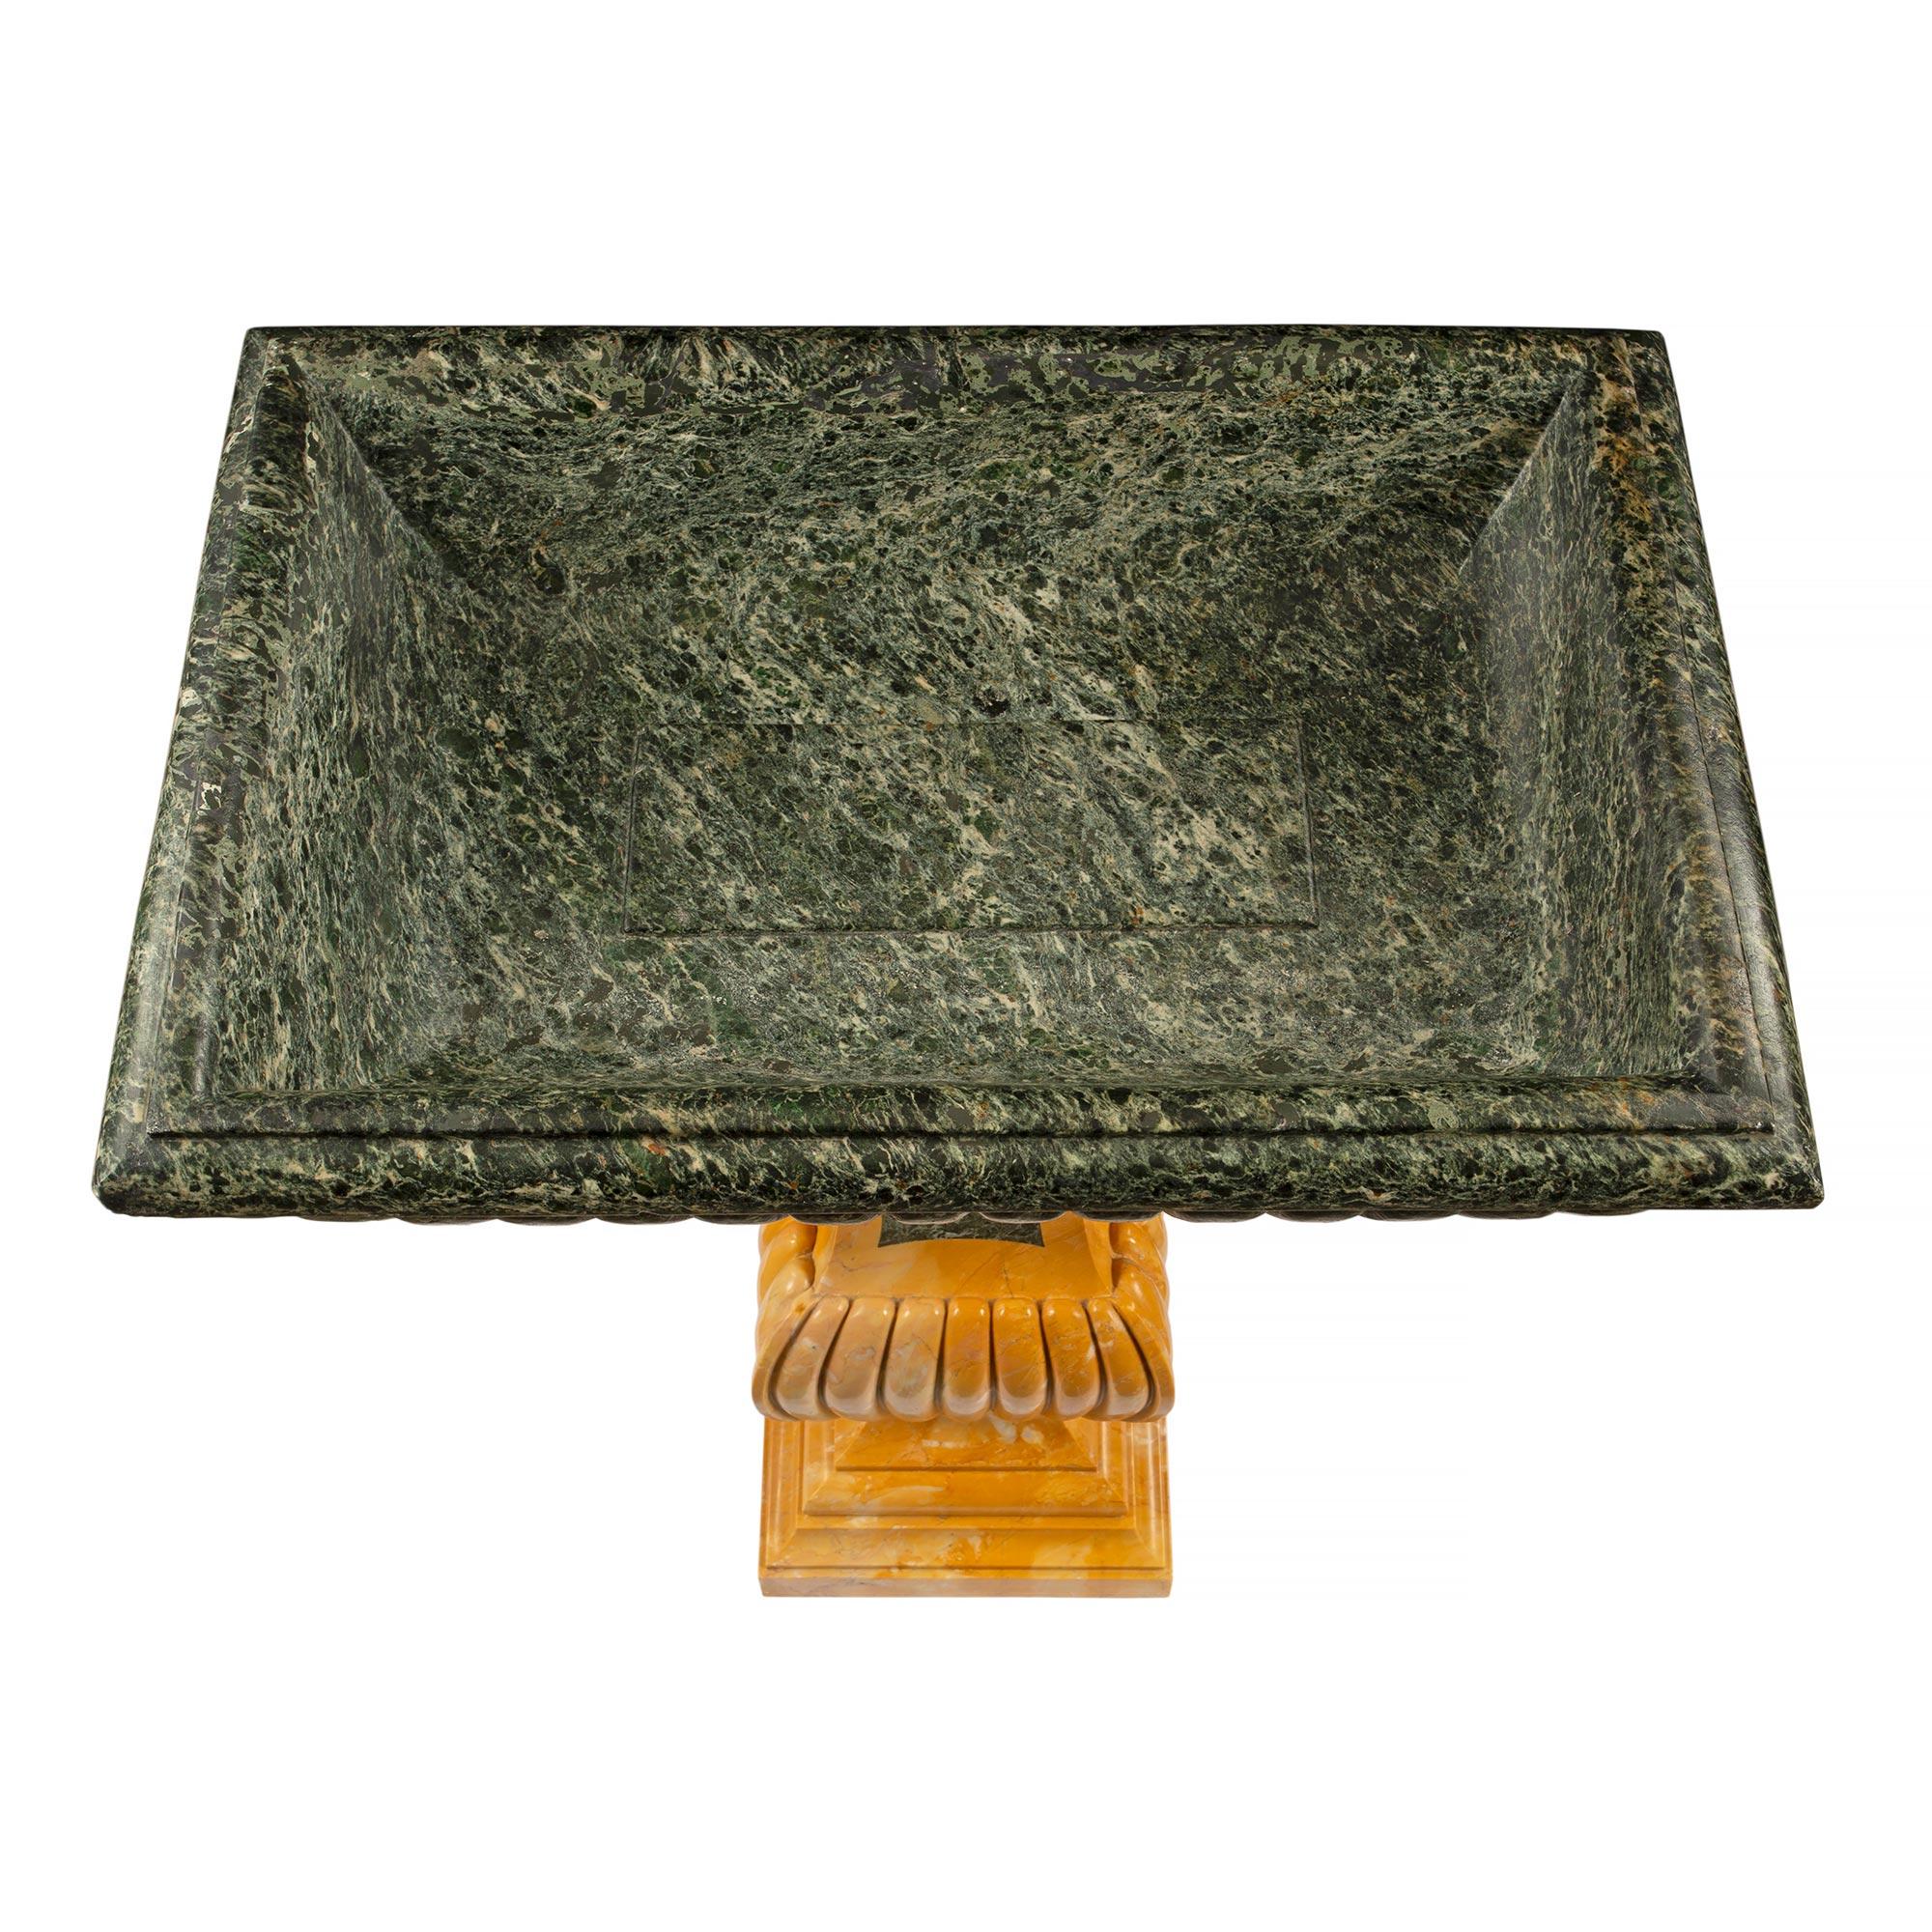 A handsome and very decorative Italian 19th century neo-classical st. Sienna and Vert Antique marble birdbath/planter. The planter is raised by a mottled rectangular base below a tapered fut and a gadroon shaped mid section. Above is the extended